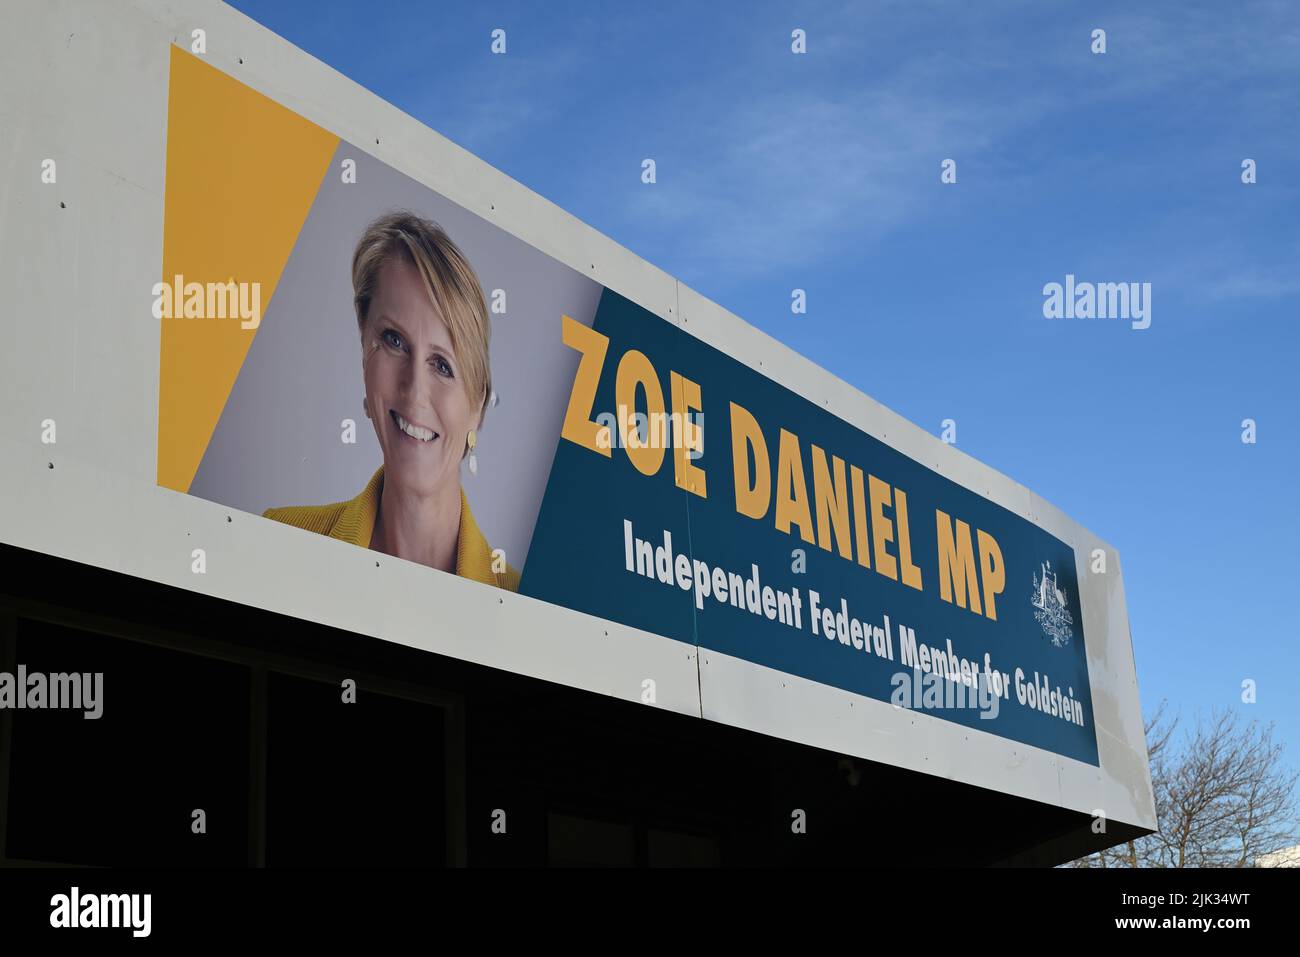 Prominent signage above Zoe Daniel MP's electorate office, in the division of Goldstein, featuring an image of the independent politician's face Stock Photo